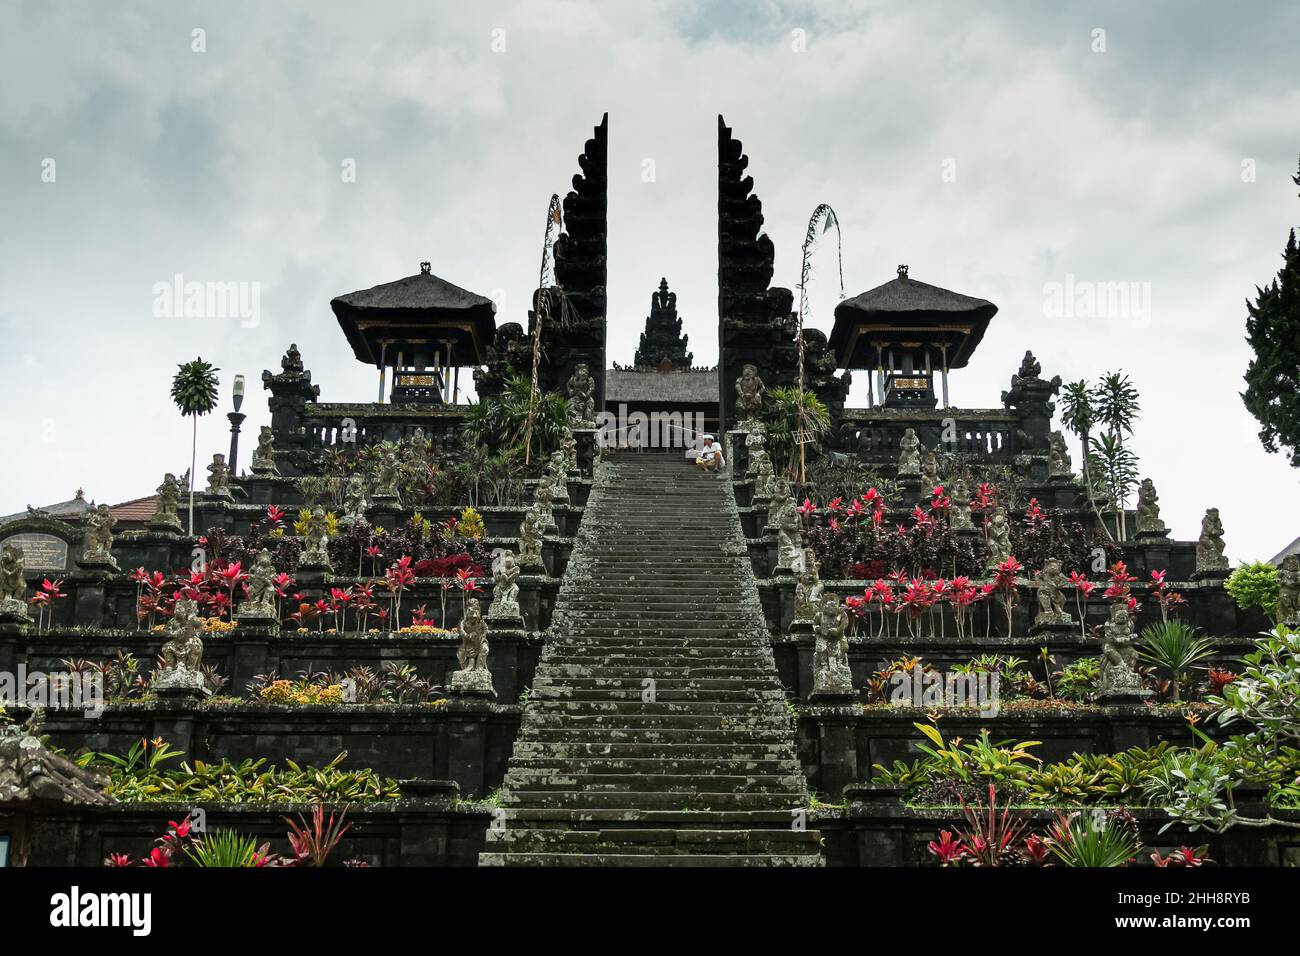 BALI, INDONESIA - FEBRUARY 28, 2014: Pura Besakih temple located on the inclines of Bali largest volcano – Mount Agung, Indonesia Stock Photo